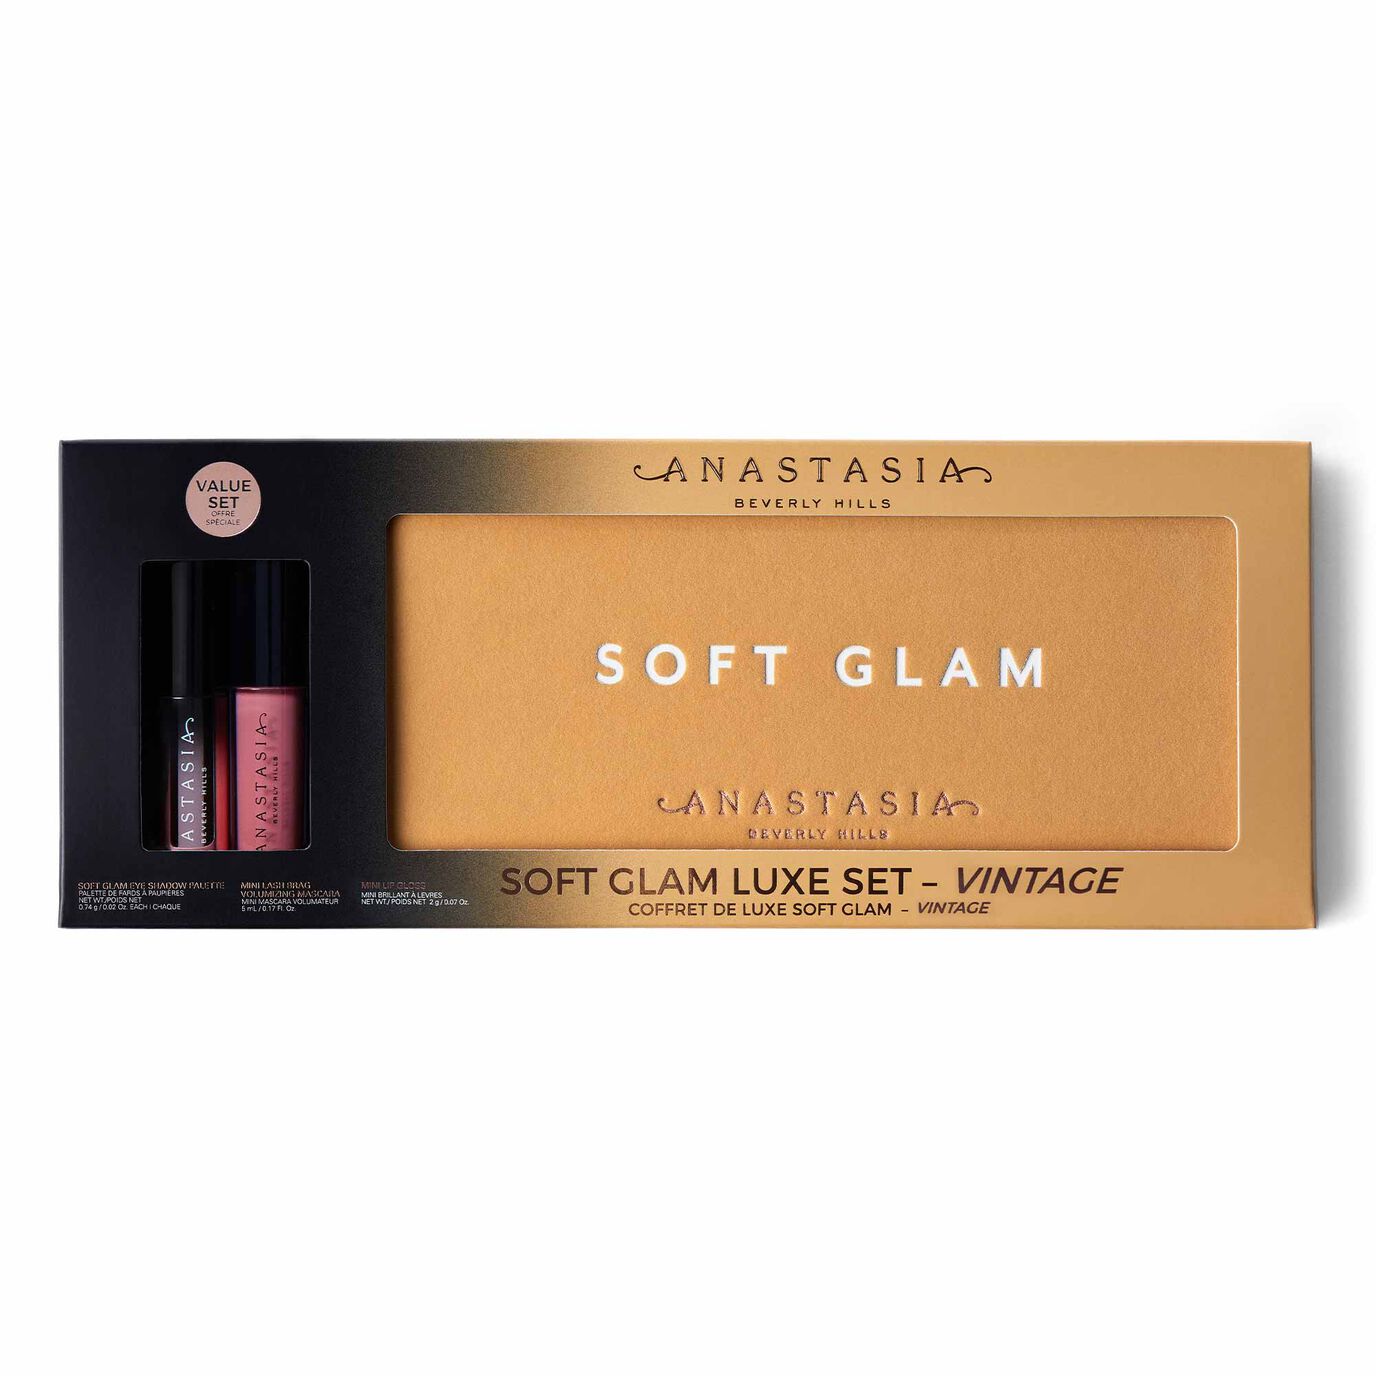 1 12 - Anastasia Beverly Hills Soft Glam Luxe